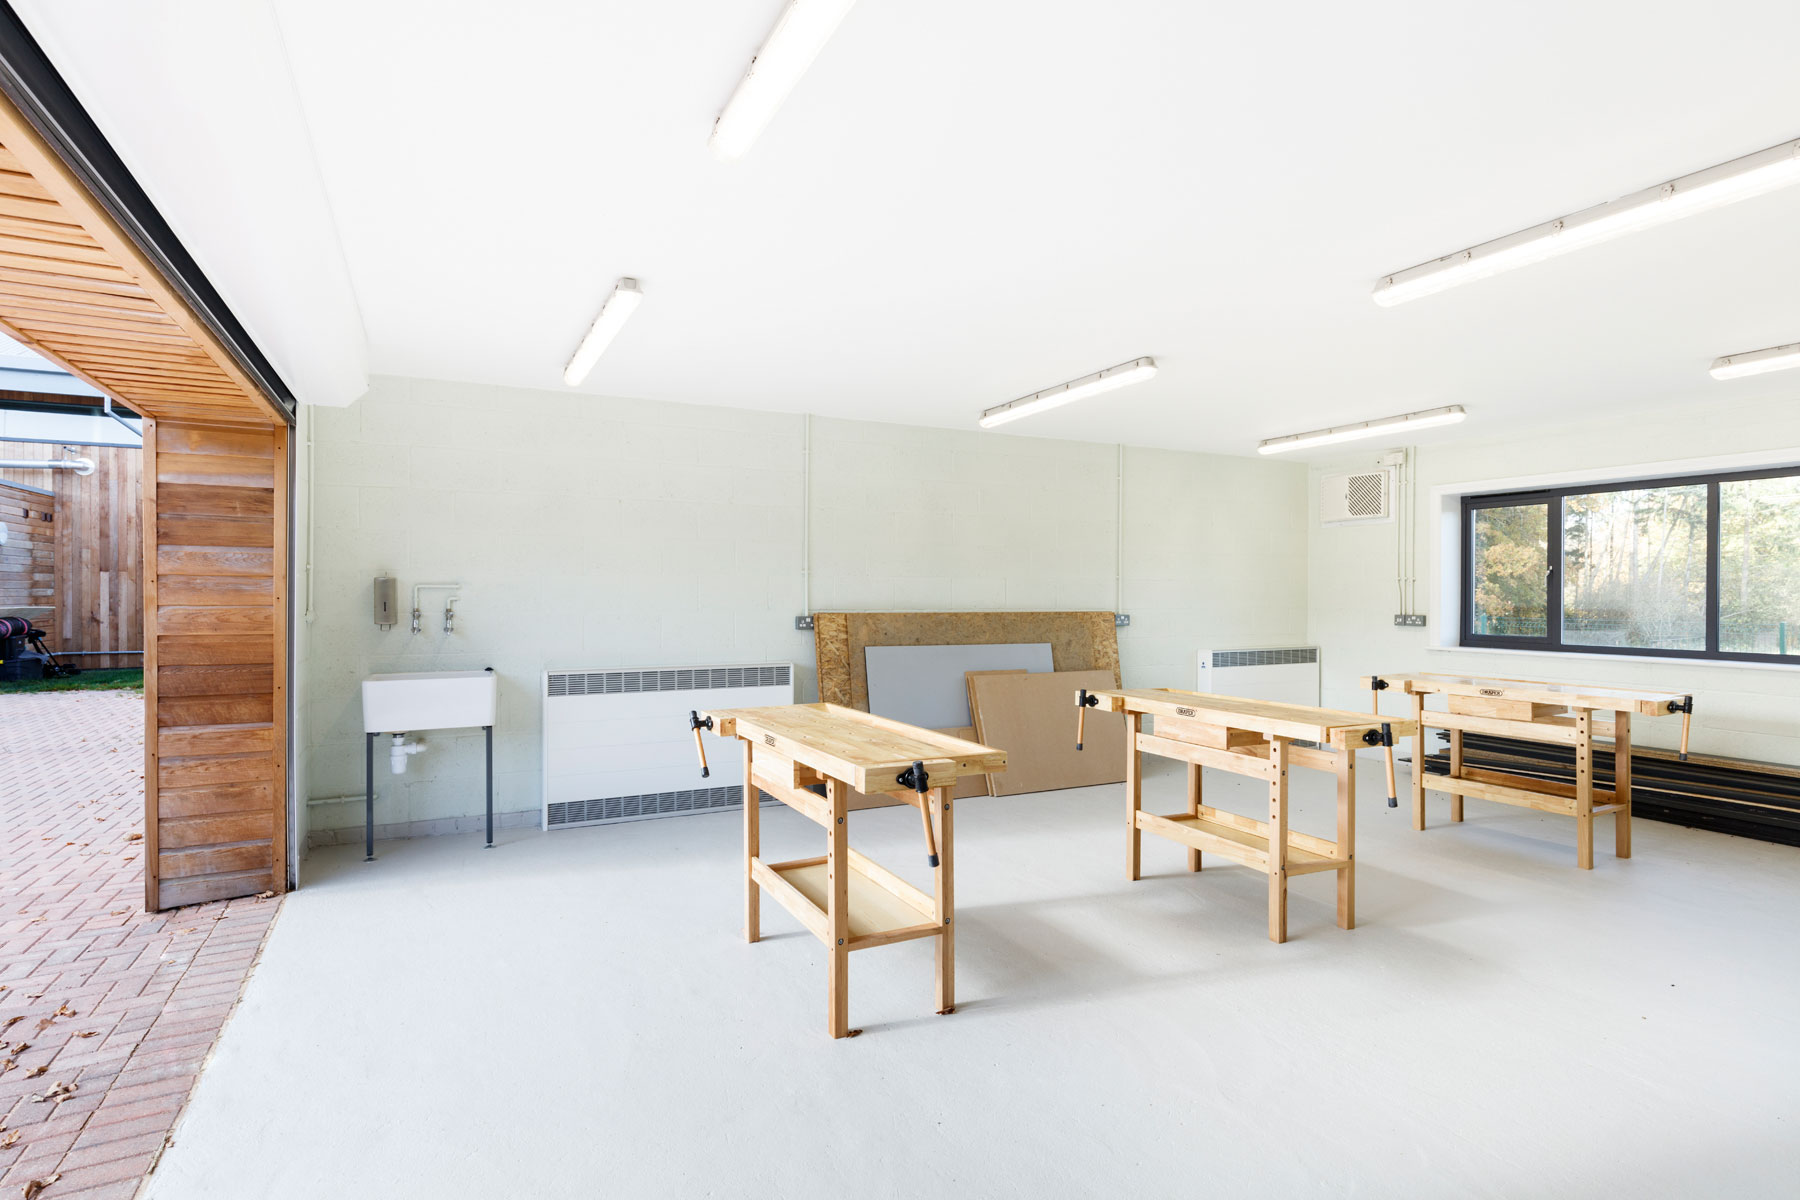 New Barn School : New timber-clad teaching facility comprising specialist rooms for art and technology